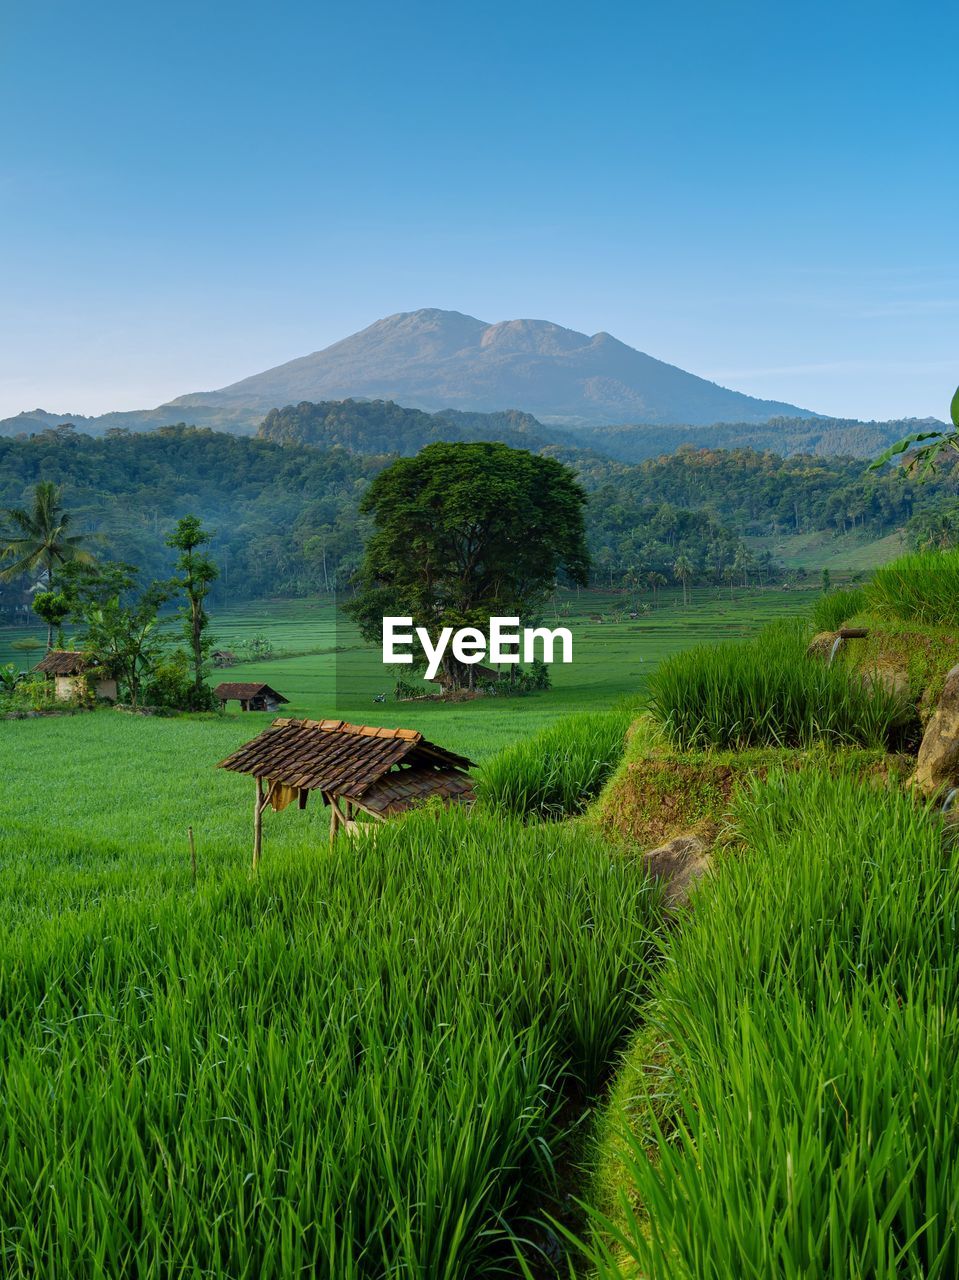 plant, landscape, green, environment, mountain, land, grassland, scenics - nature, grass, nature, field, sky, agriculture, rural scene, paddy field, meadow, natural environment, beauty in nature, pasture, tree, no people, crop, rice, farm, rural area, mountain range, rice paddy, growth, tranquility, plain, outdoors, blue, rice - food staple, food and drink, plateau, water, tranquil scene, food, prairie, flower, day, non-urban scene, clear sky, highland, cereal plant, wilderness, valley, foliage, travel